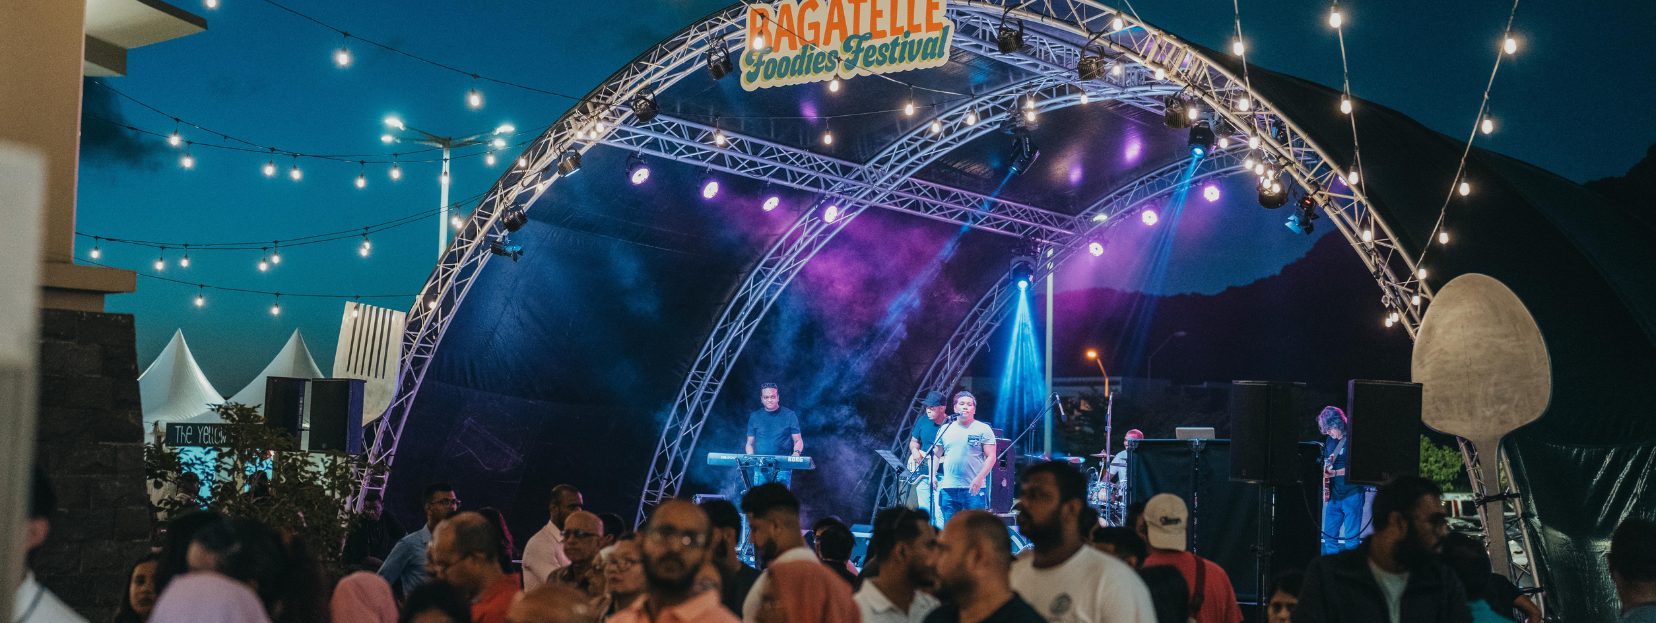 Bagatelle Mall Launches its First-Ever Foodies Festival in Mauritius!